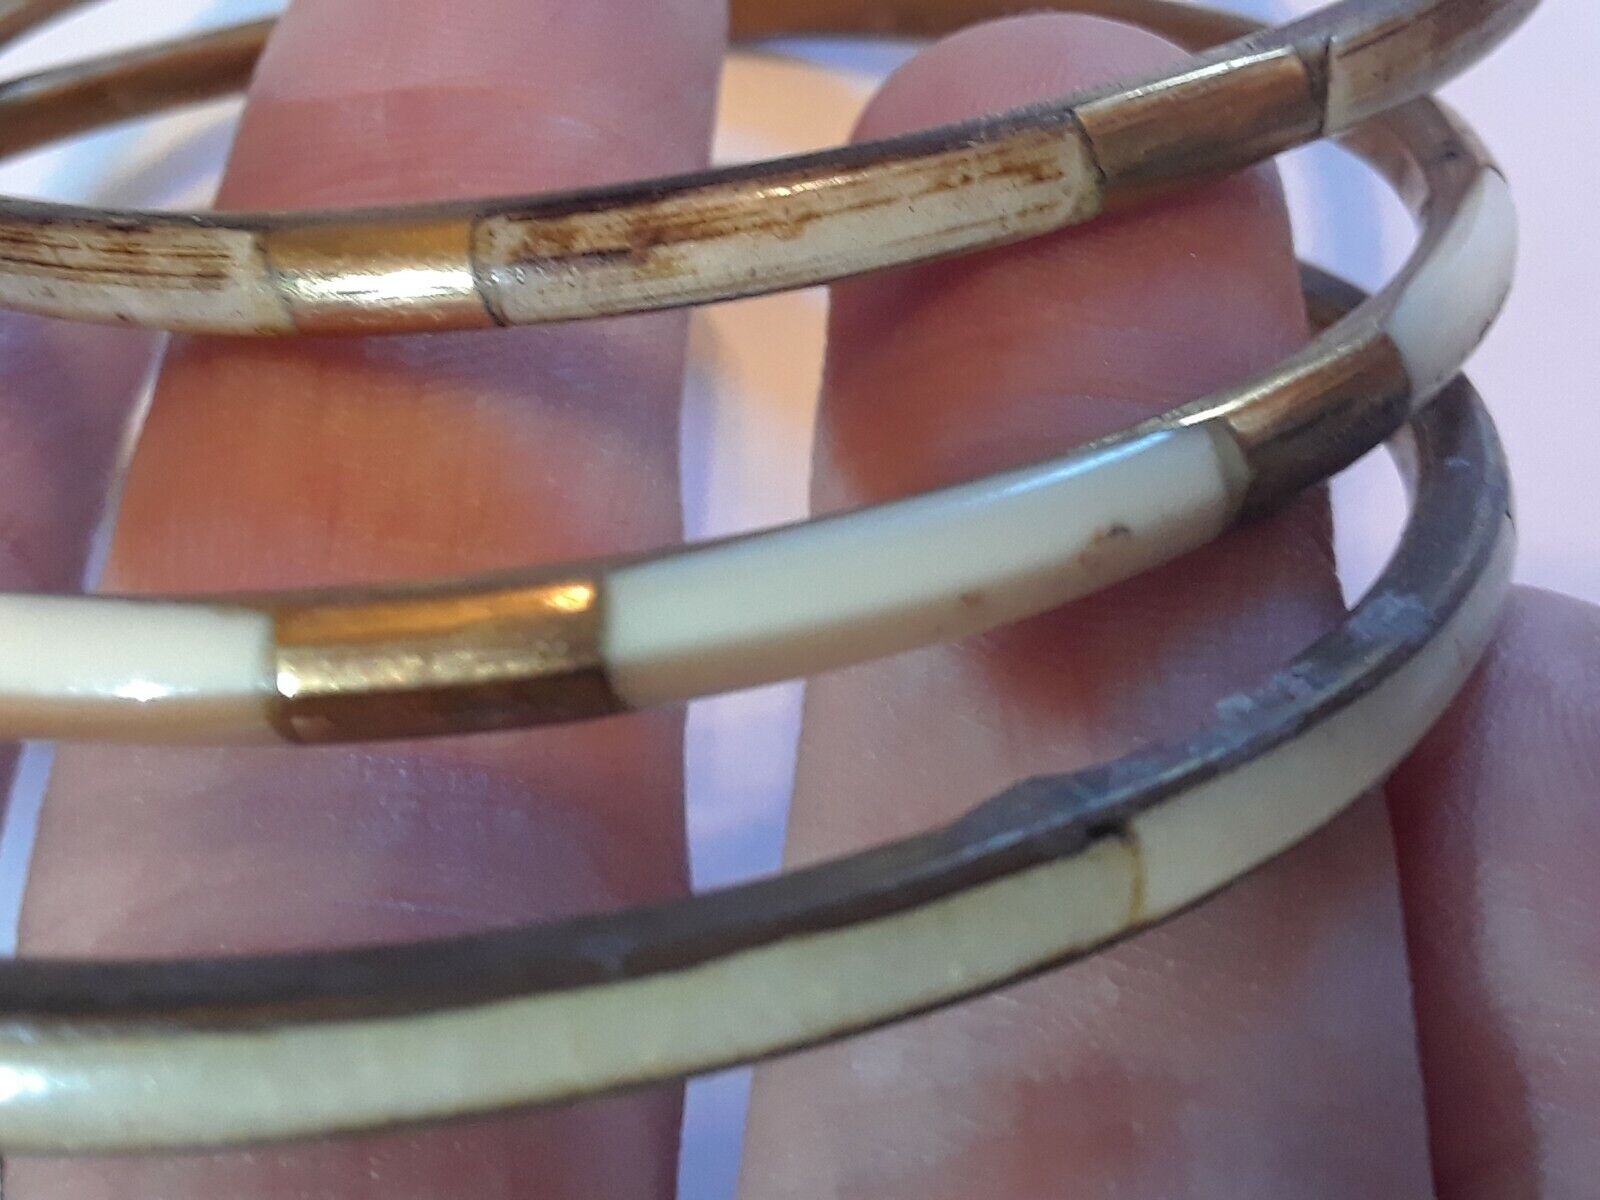 Lot of 5 gold tone bangle bracelets with inlay stone. Made in India. Beautiful! Unbranded - фотография #5